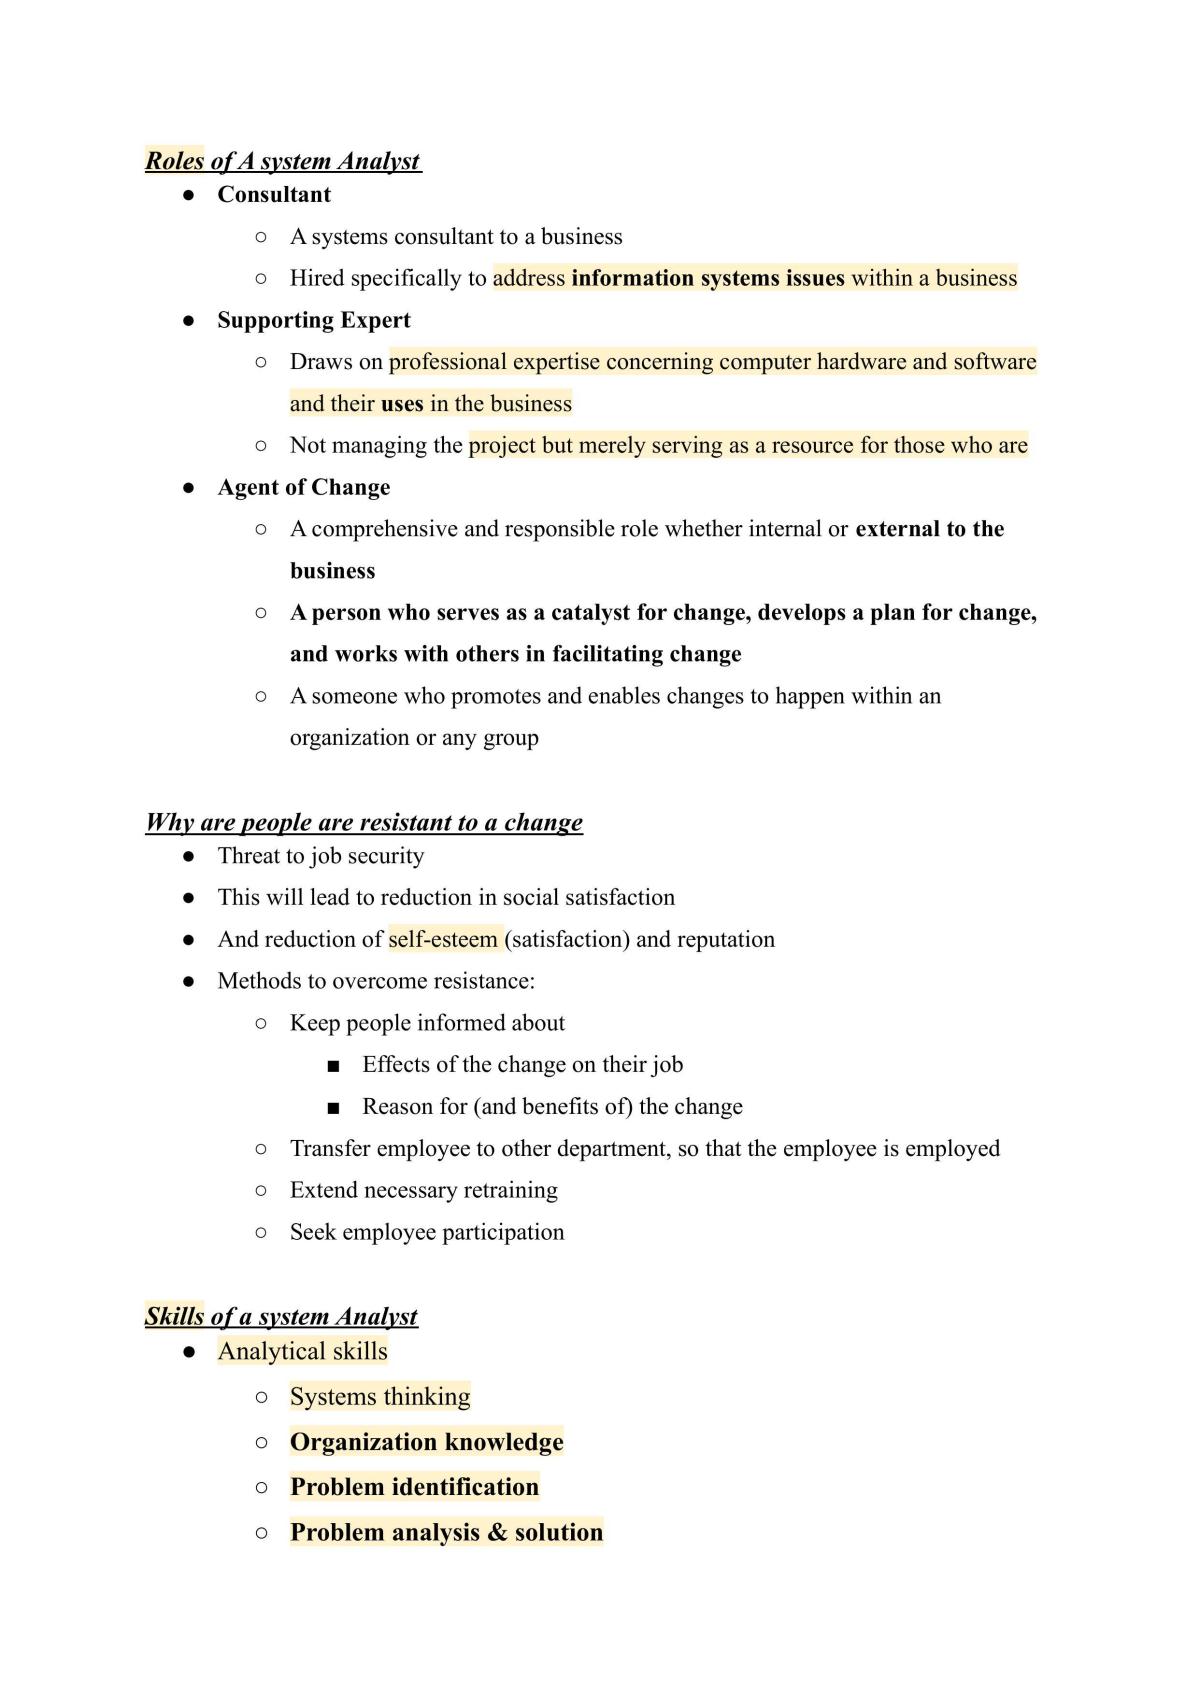 Complete Study Note for SAAD - Page 5